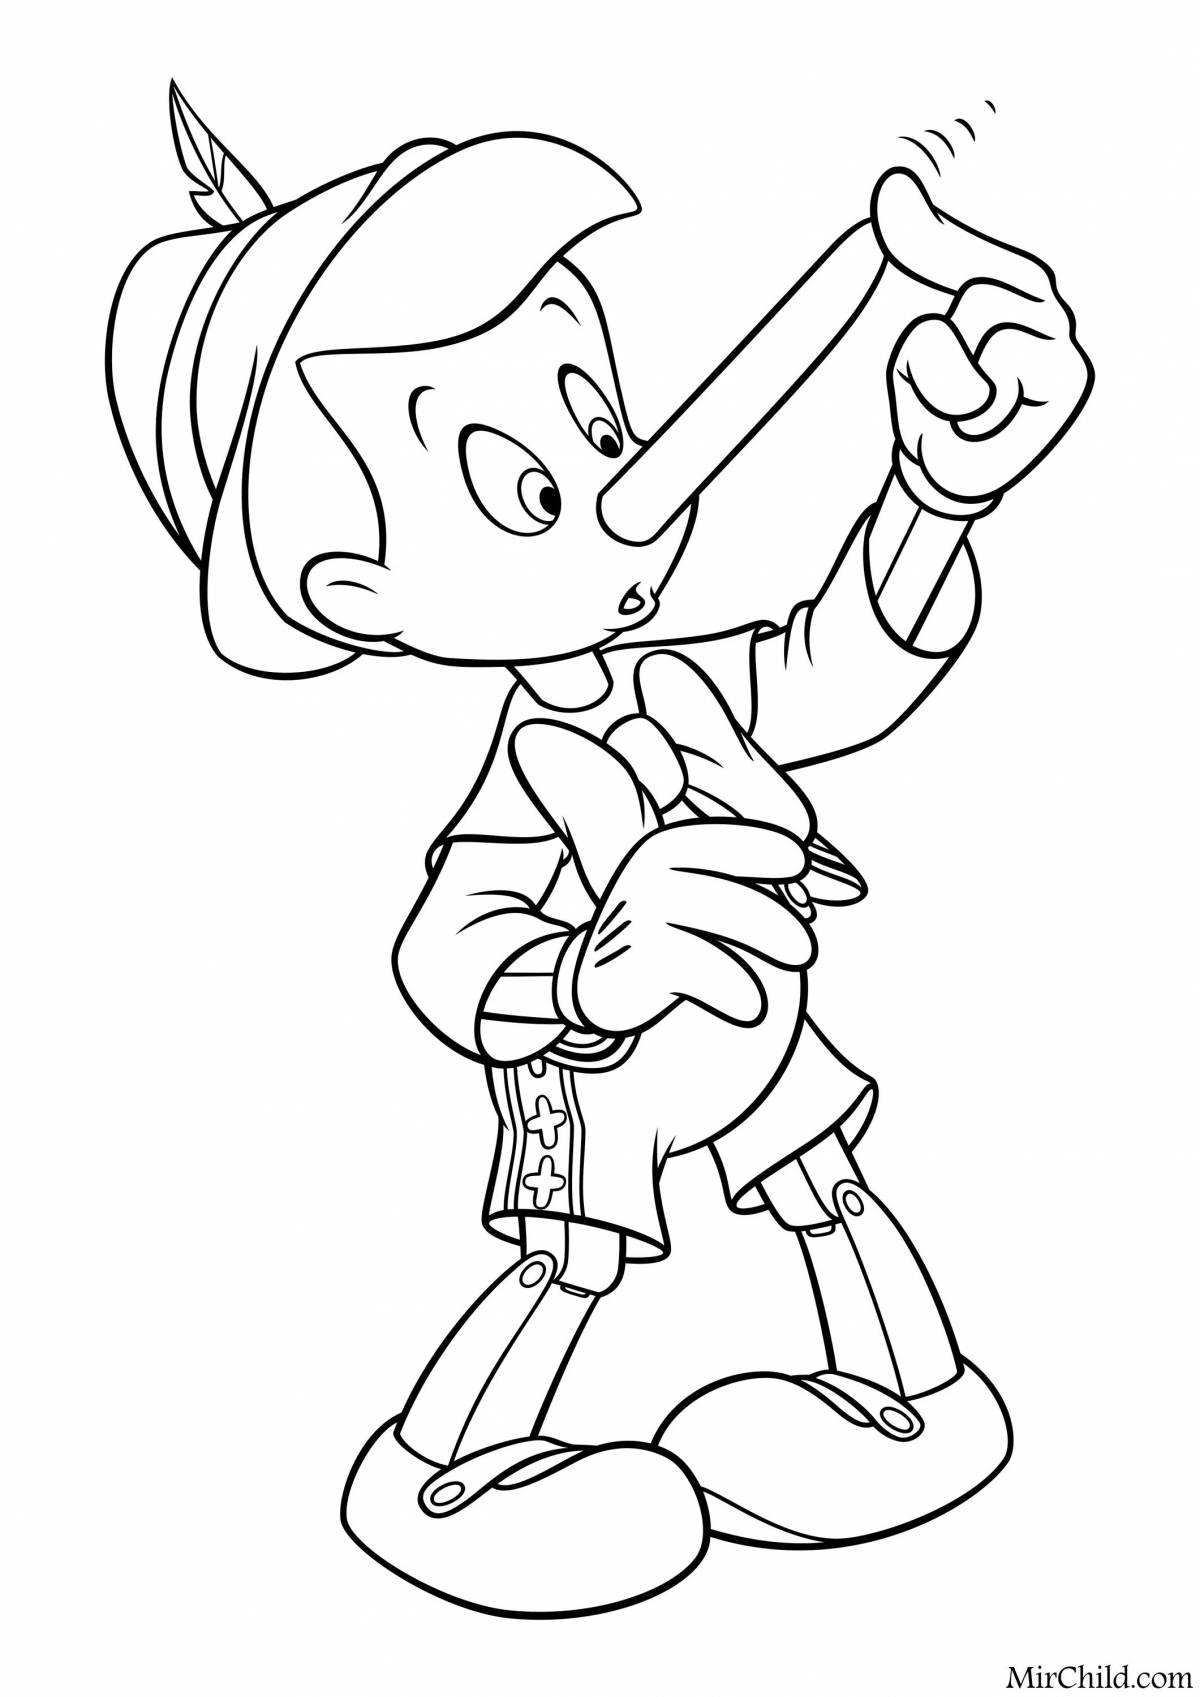 Pinocchio coloring pages for kids